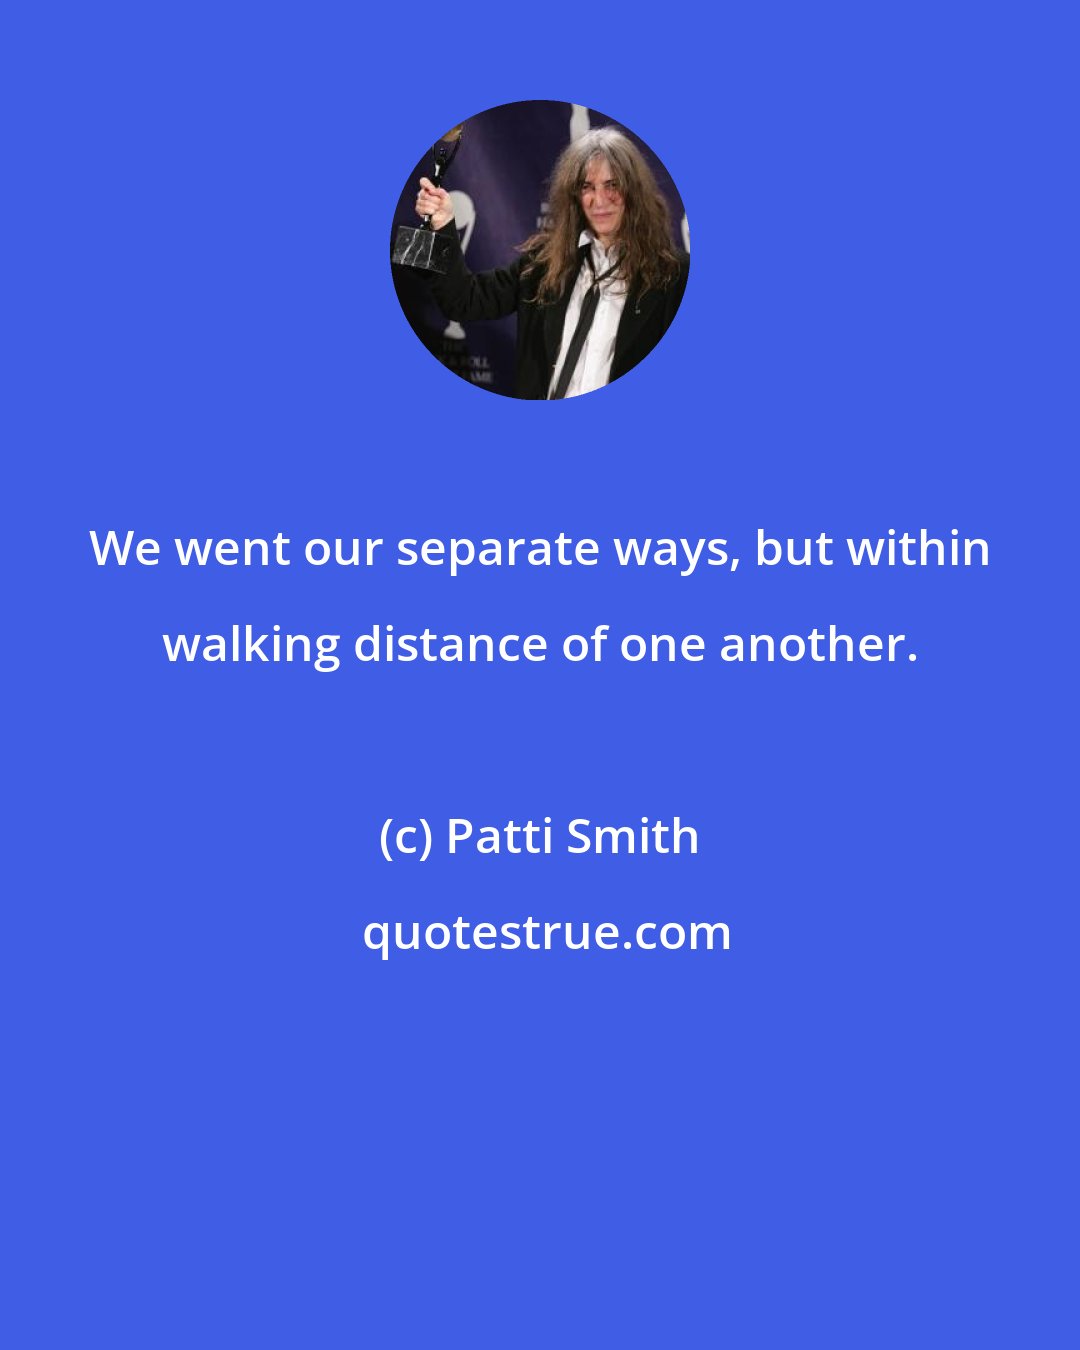 Patti Smith: We went our separate ways, but within walking distance of one another.